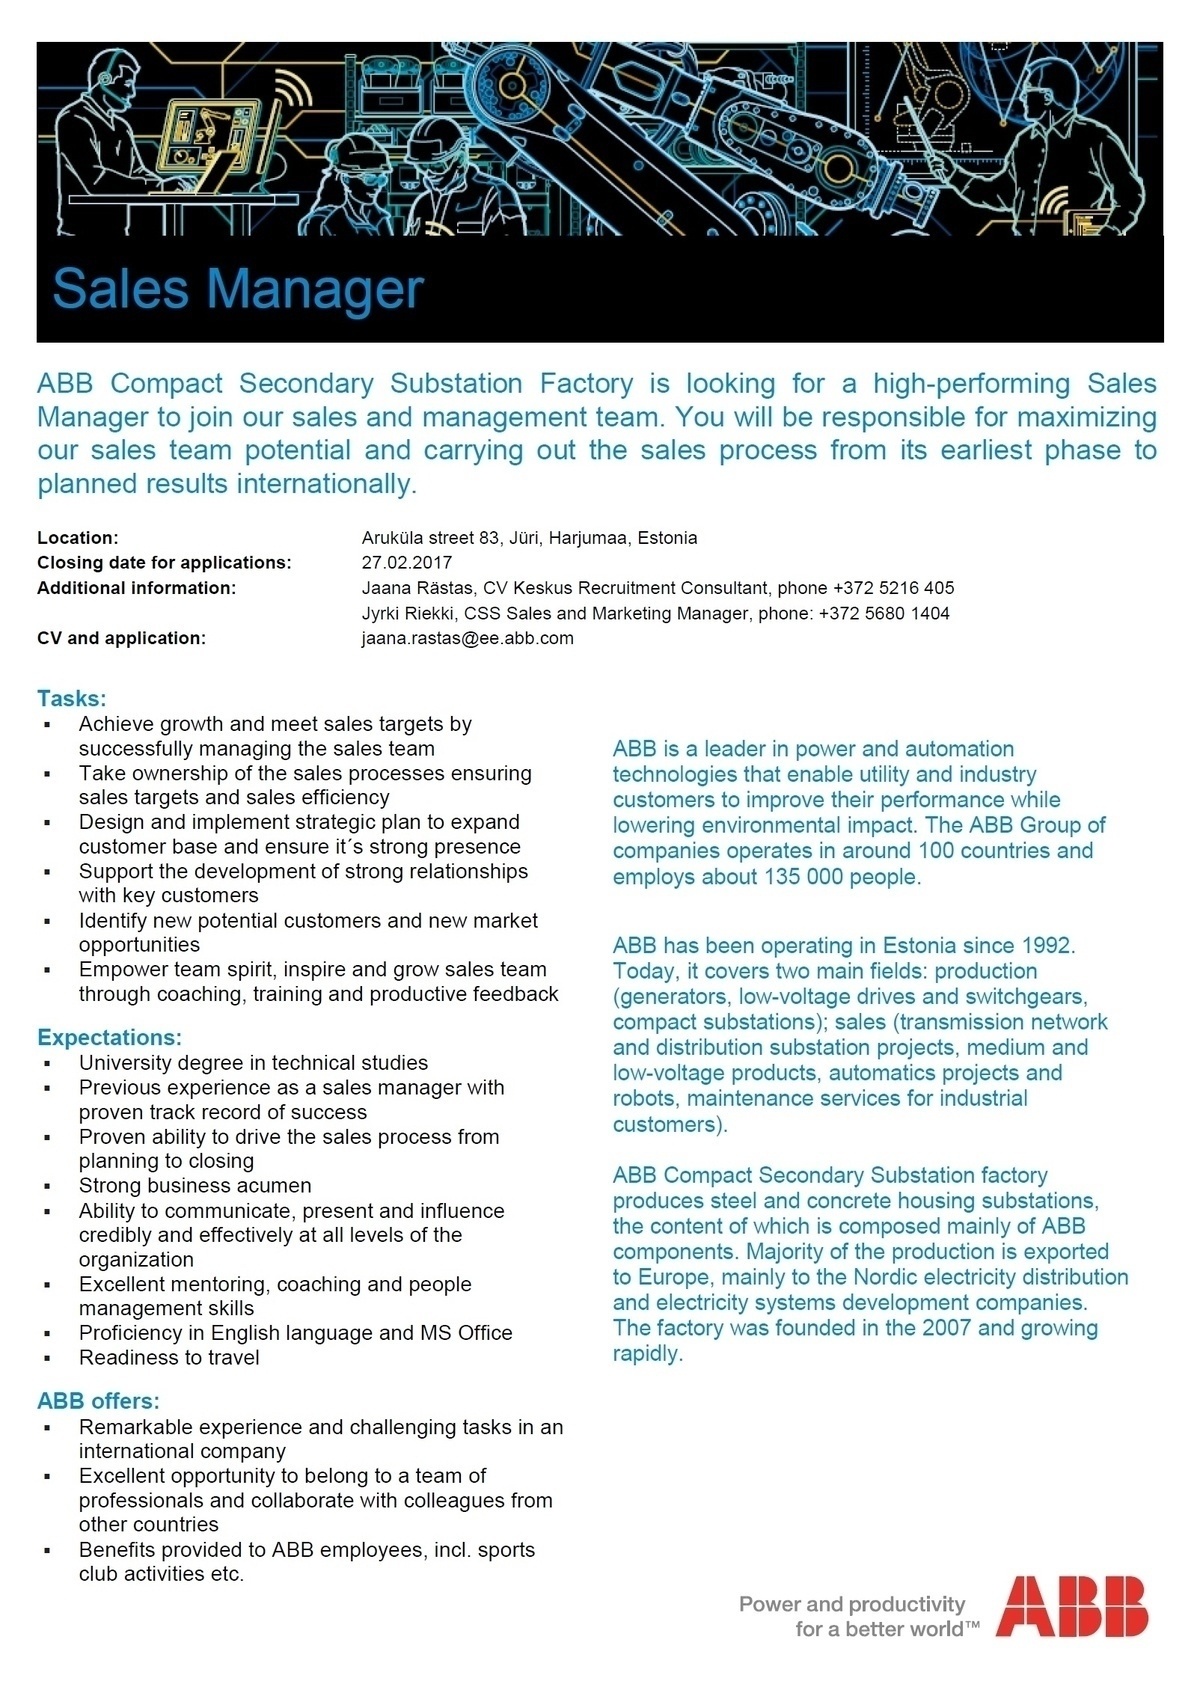 CV KESKUS OÜ ABB is looking for a Sales Manager